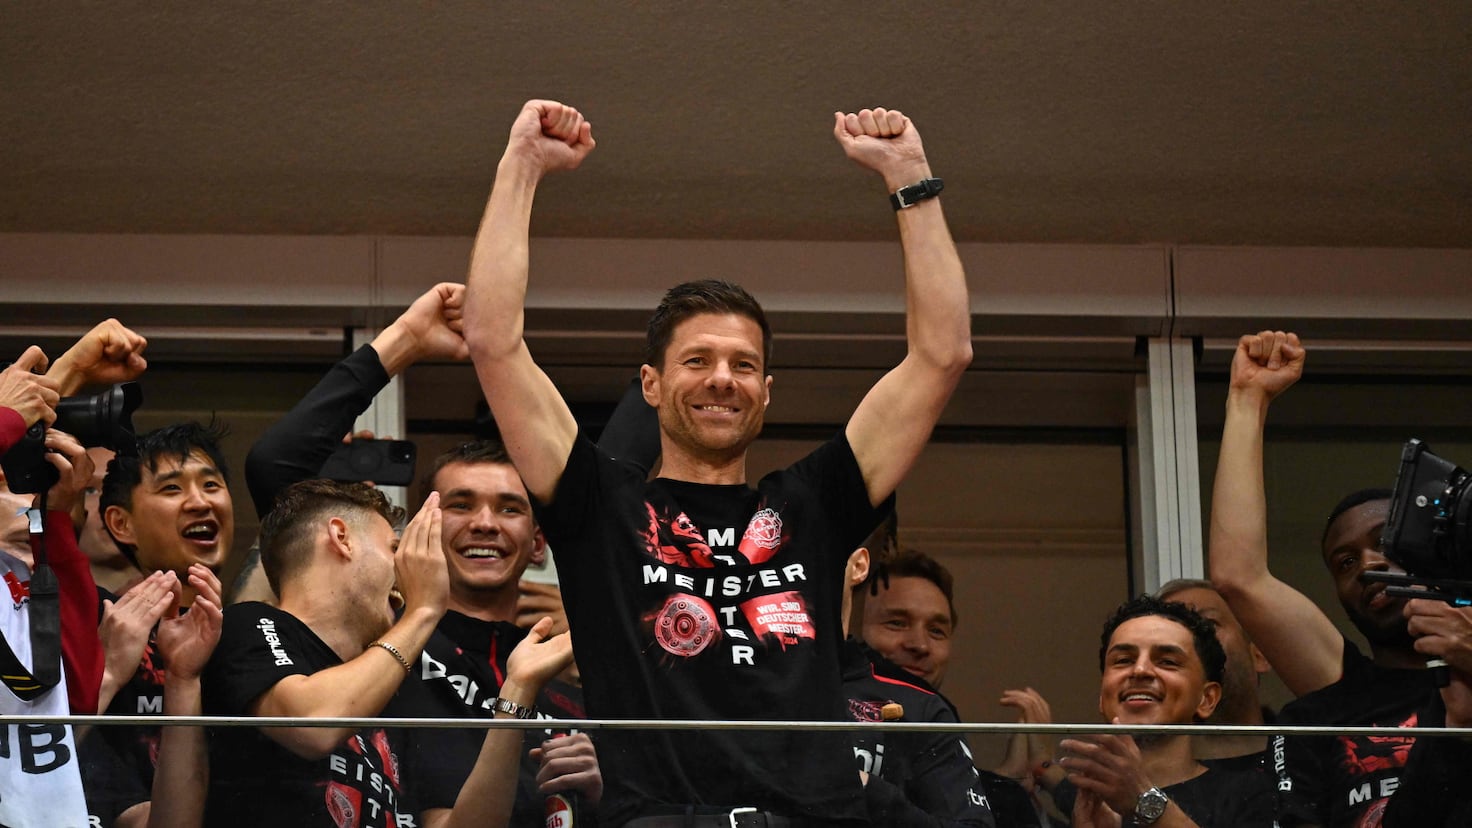 Leverkusen is studying changing a law to give Xabi Alonso a street: It is worth discussing it
